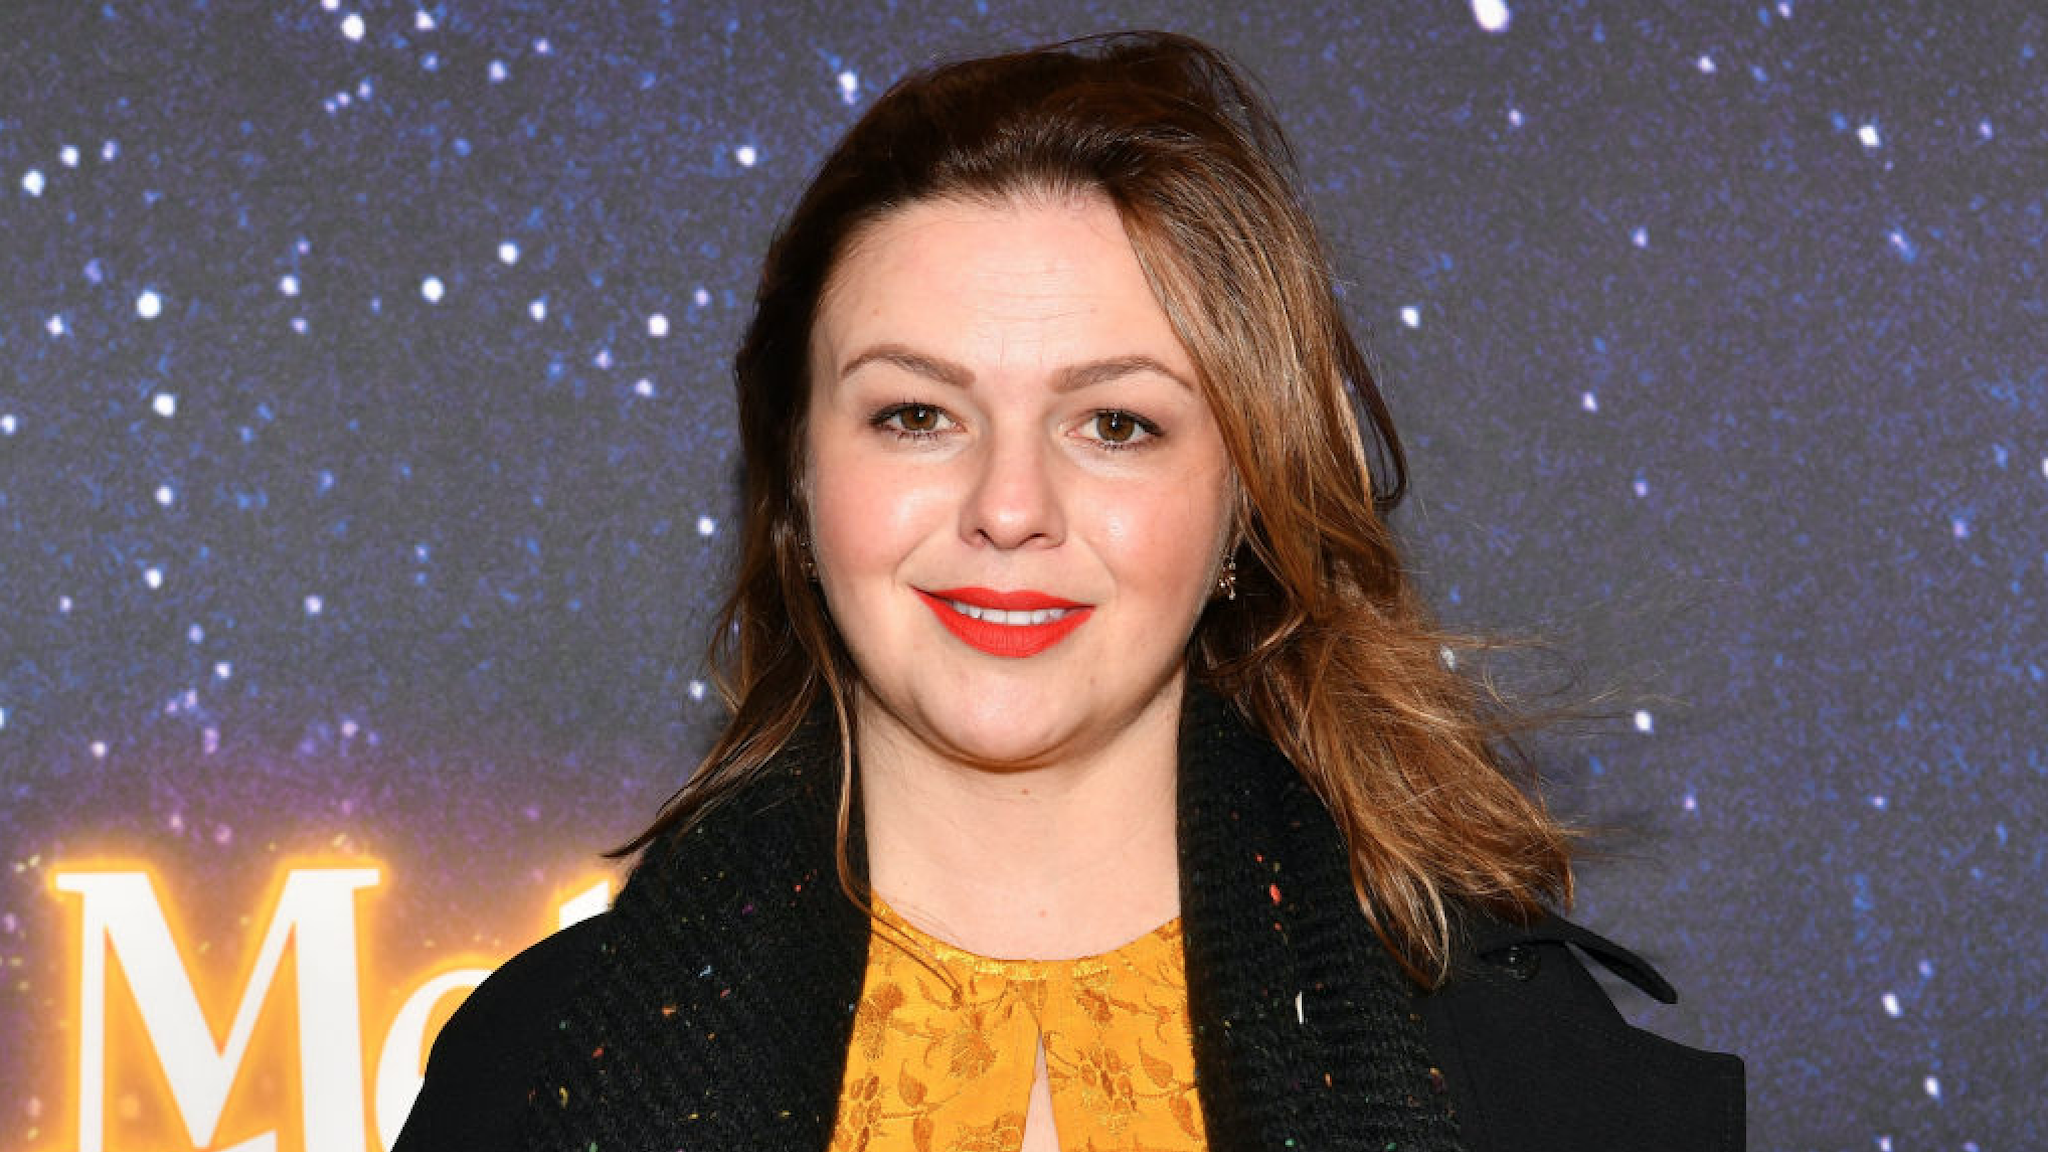 Amber Tamblyn attends the "Meteor Shower" Broadway Opening Night at the Booth Theatre on November 29, 2017 in New York City.